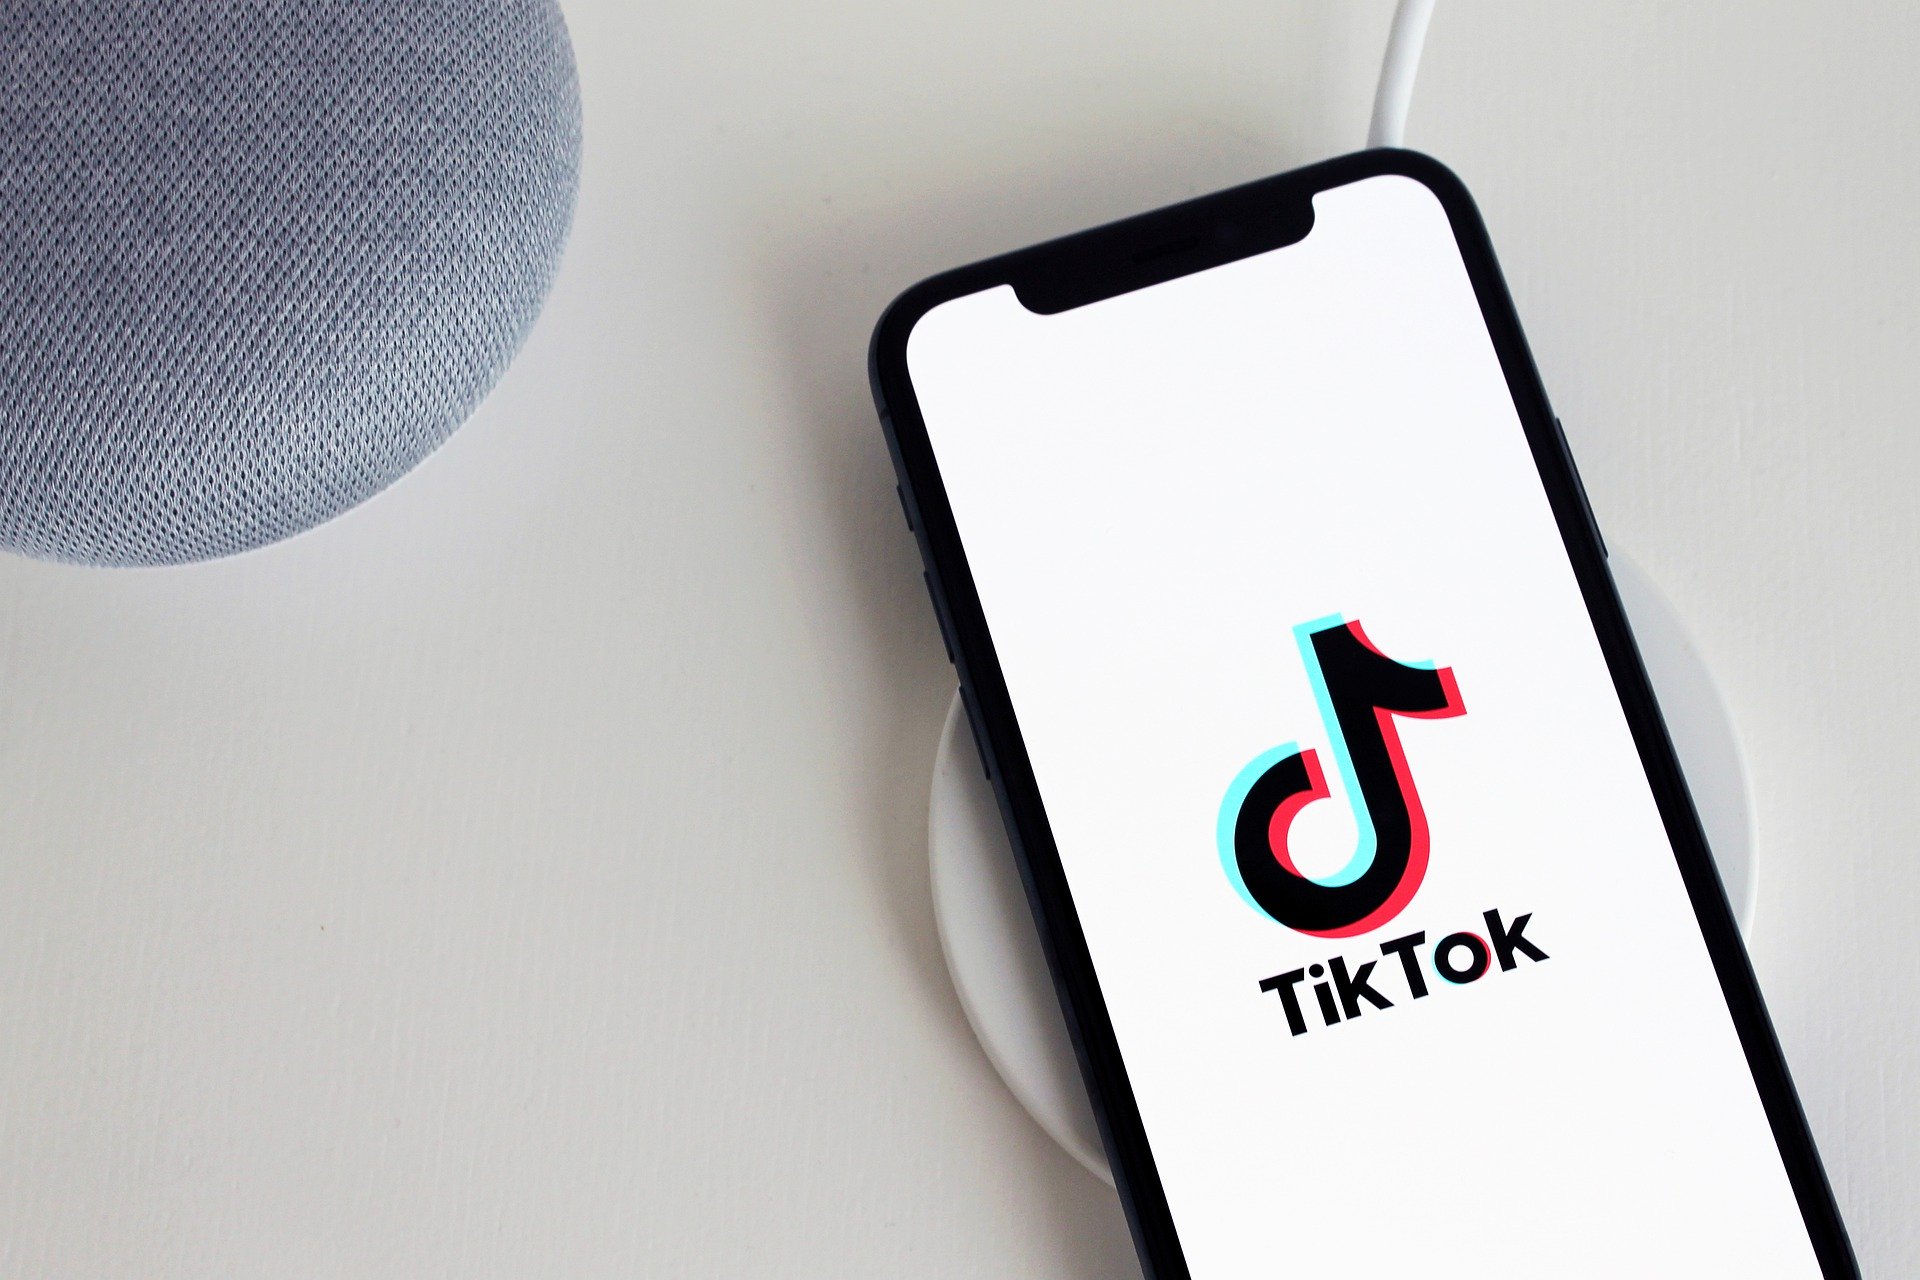 How Will Microsoft Get Immensely Benefitted By Buying TikTok?